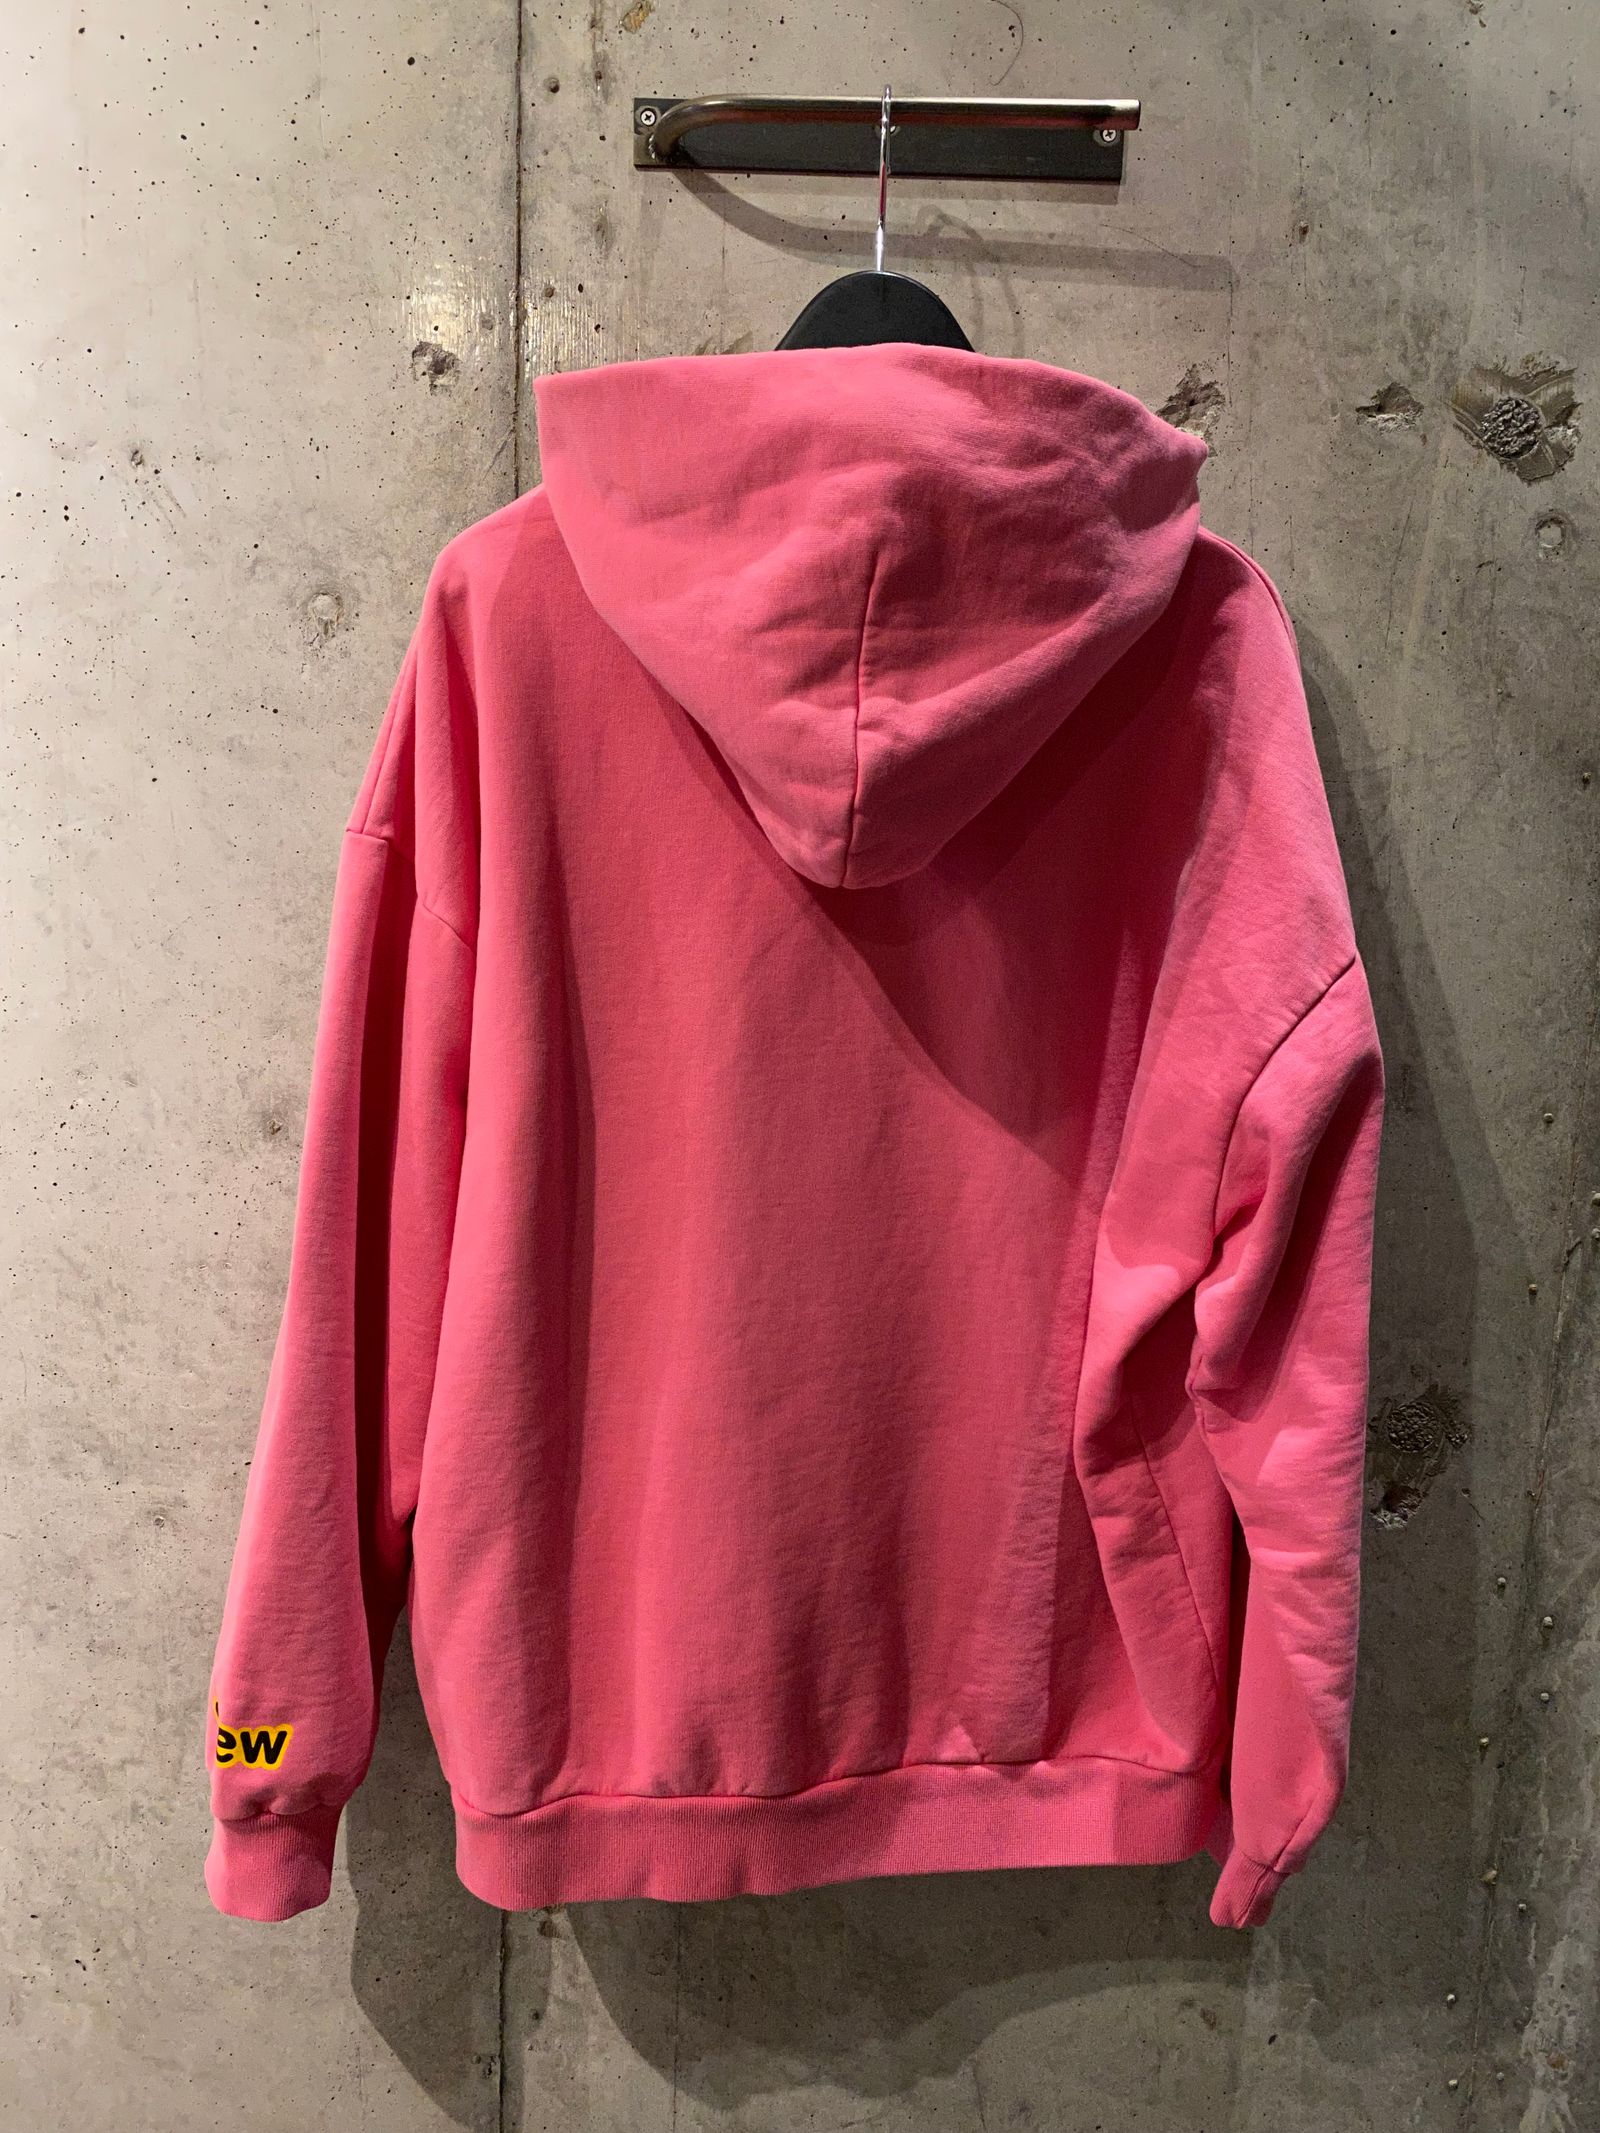 drew house - drew house Mascot Hoodie / Light pink | R and another 